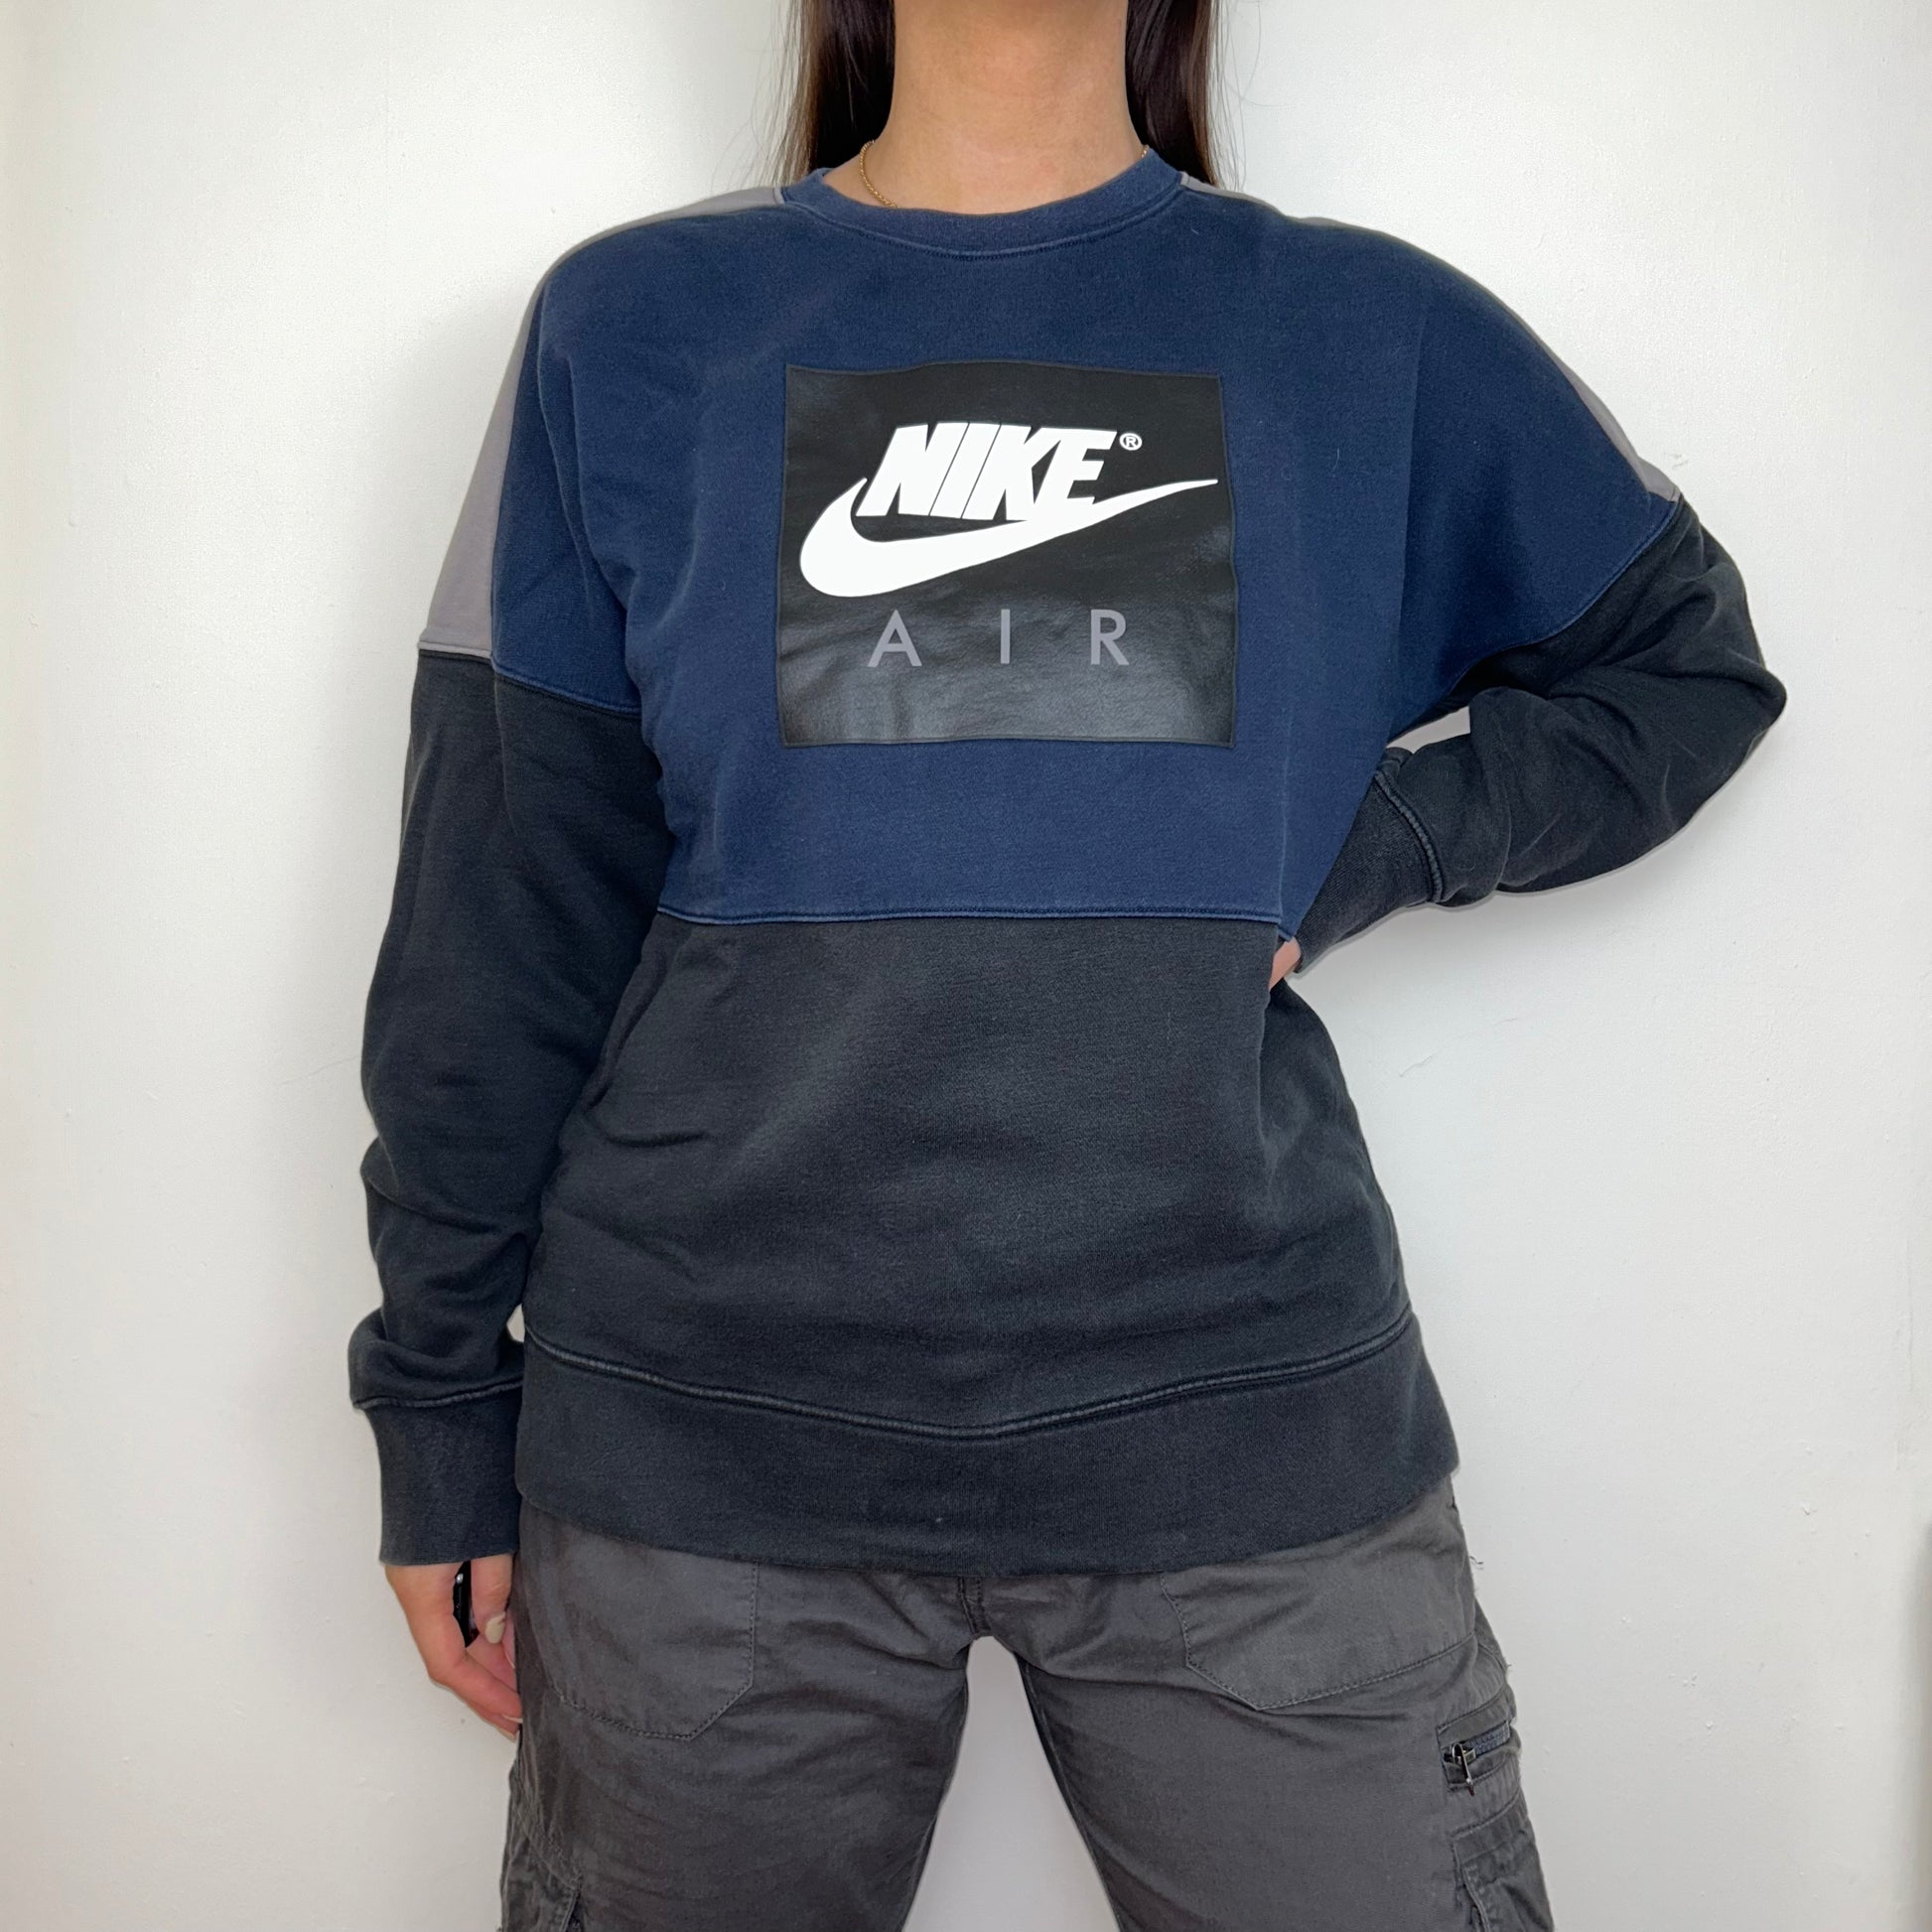 black and navy sweatshirt with white nike logo shown on a model wearing grey cargo trousers